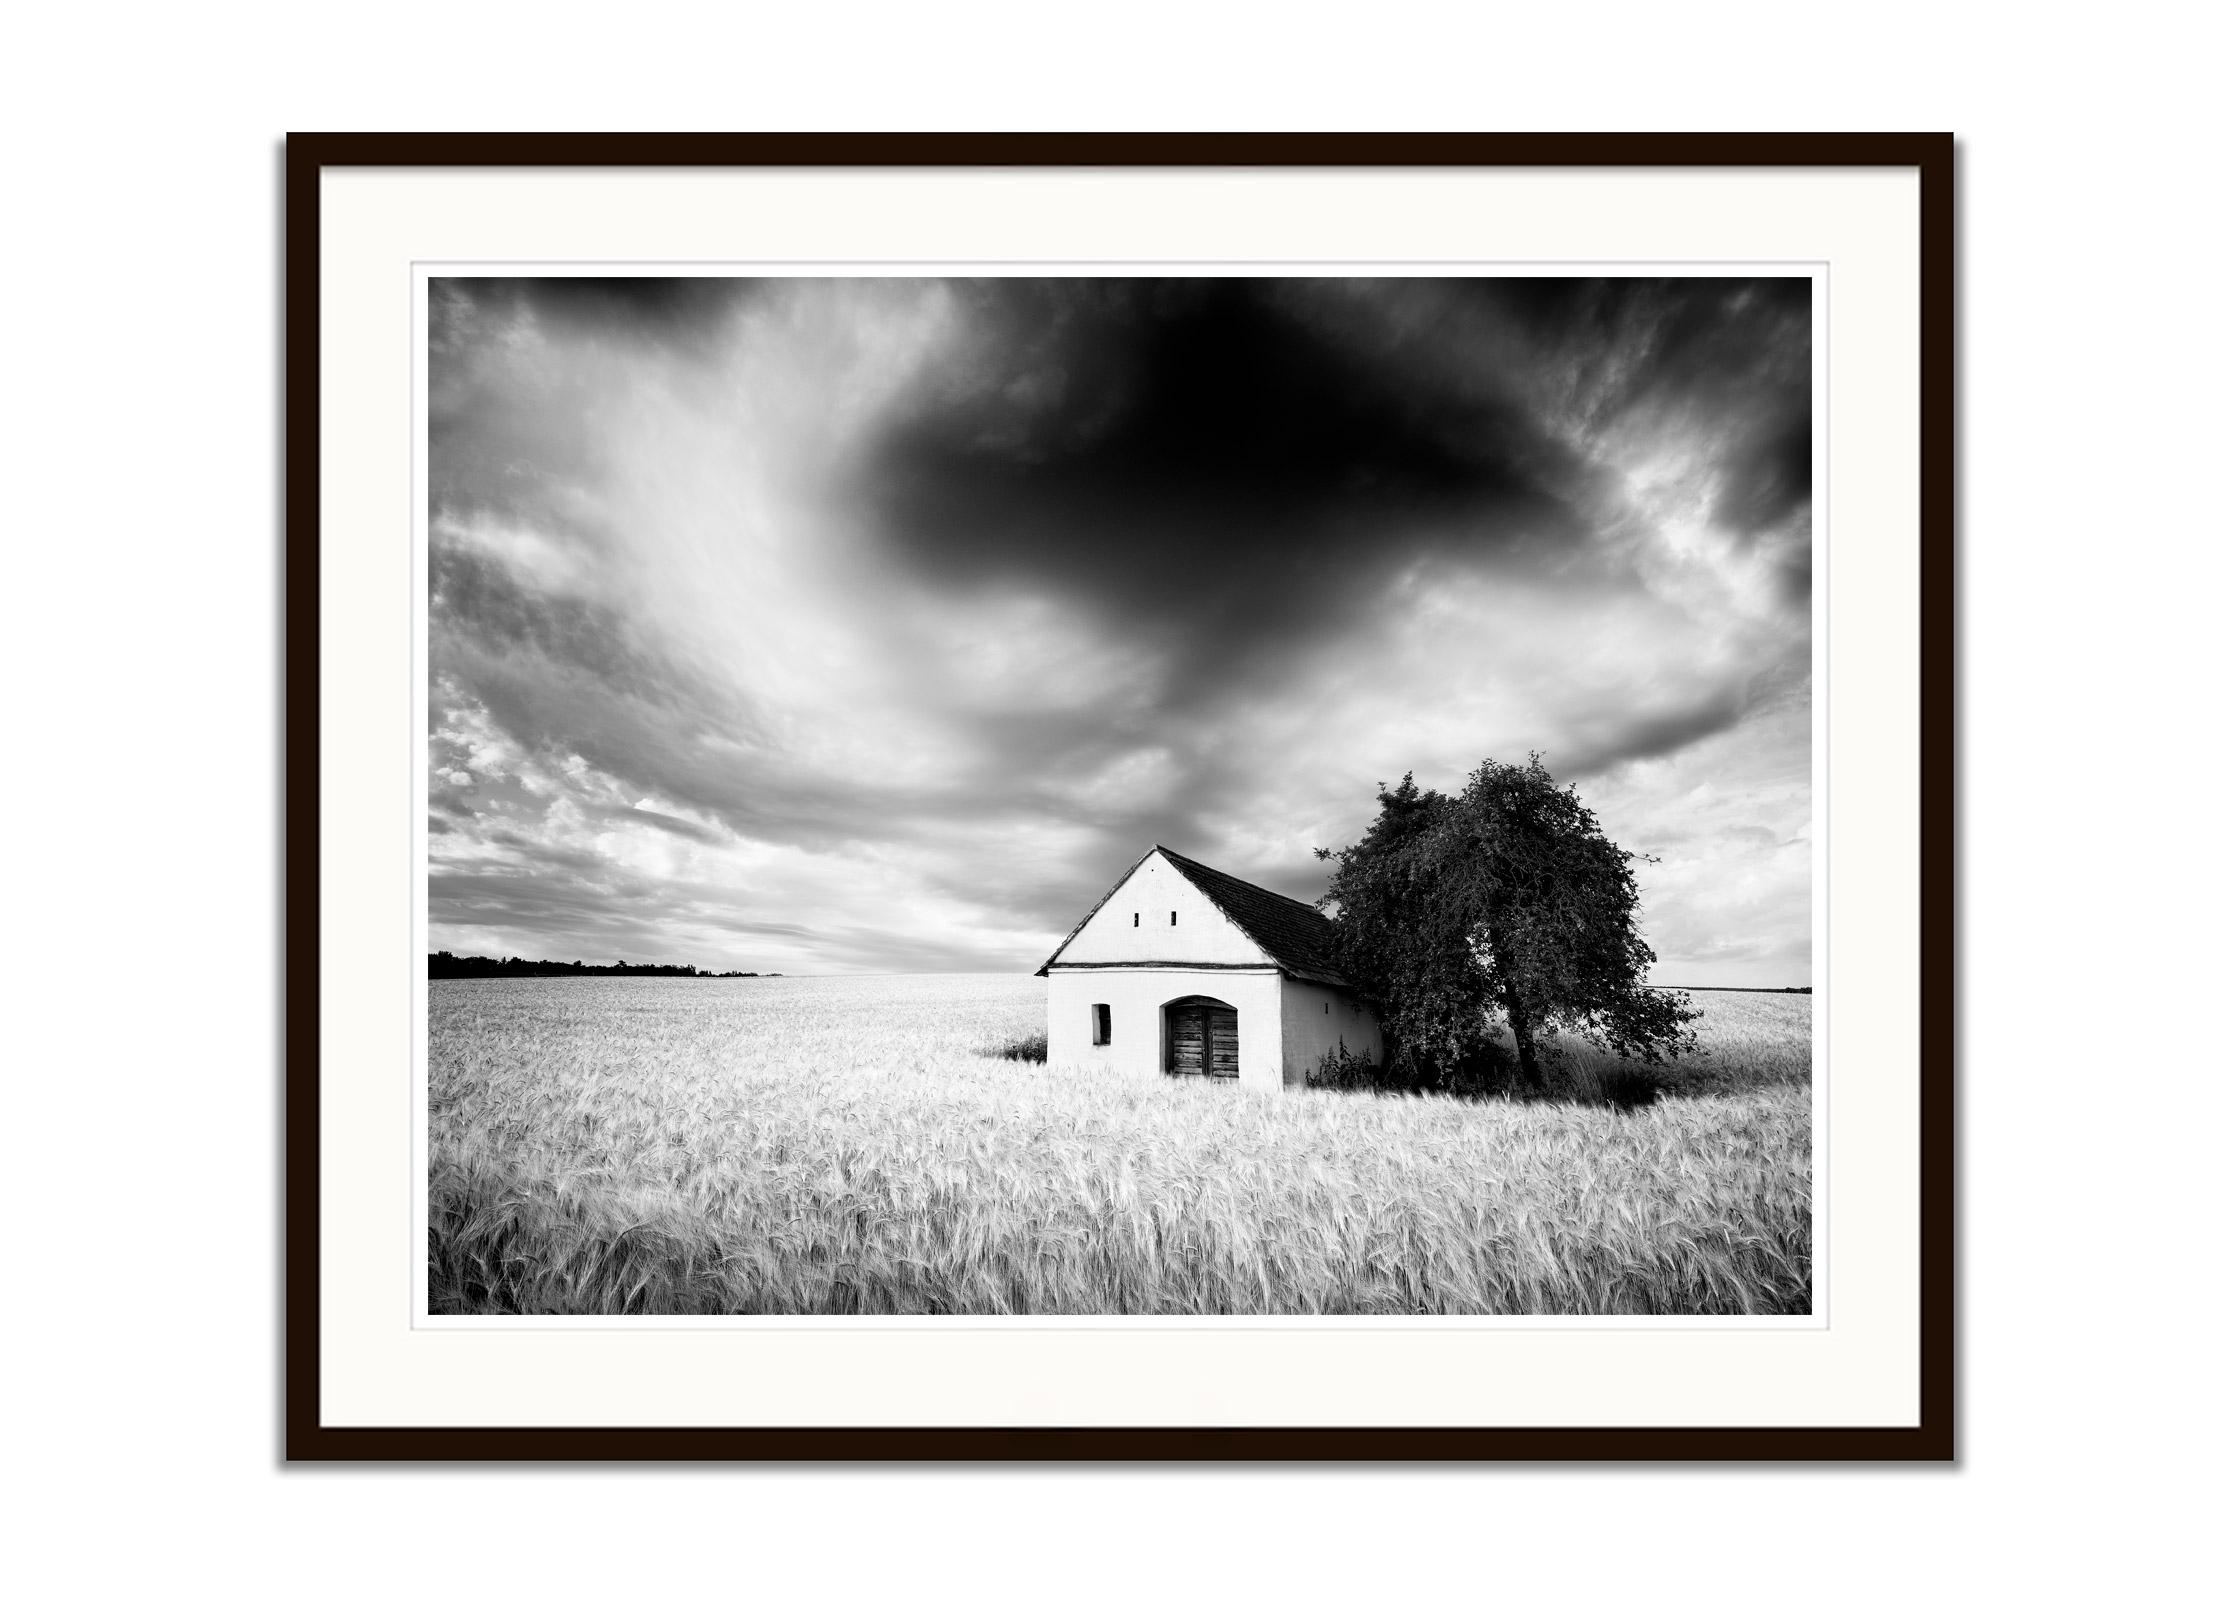 Wine Press House, wheat field, heavy cloud, black & white landscape photography - Gray Black and White Photograph by Gerald Berghammer